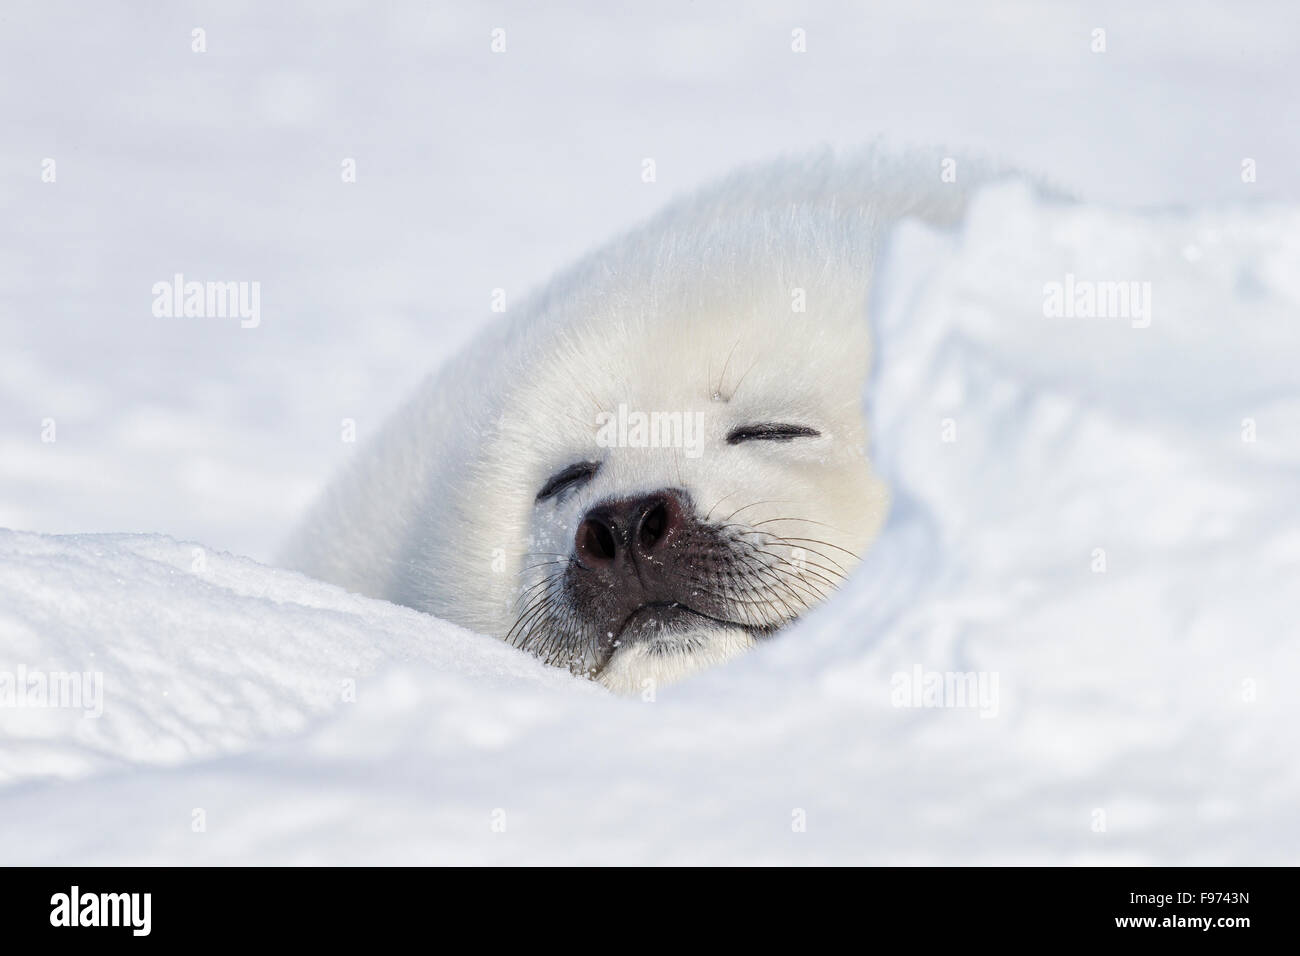 Harp seal (Pagophilus groenlandicus), whitecoat pup, on sea ice, Gulf of St. Lawrence, near Îles de la Madeleine (Magdalen Stock Photo